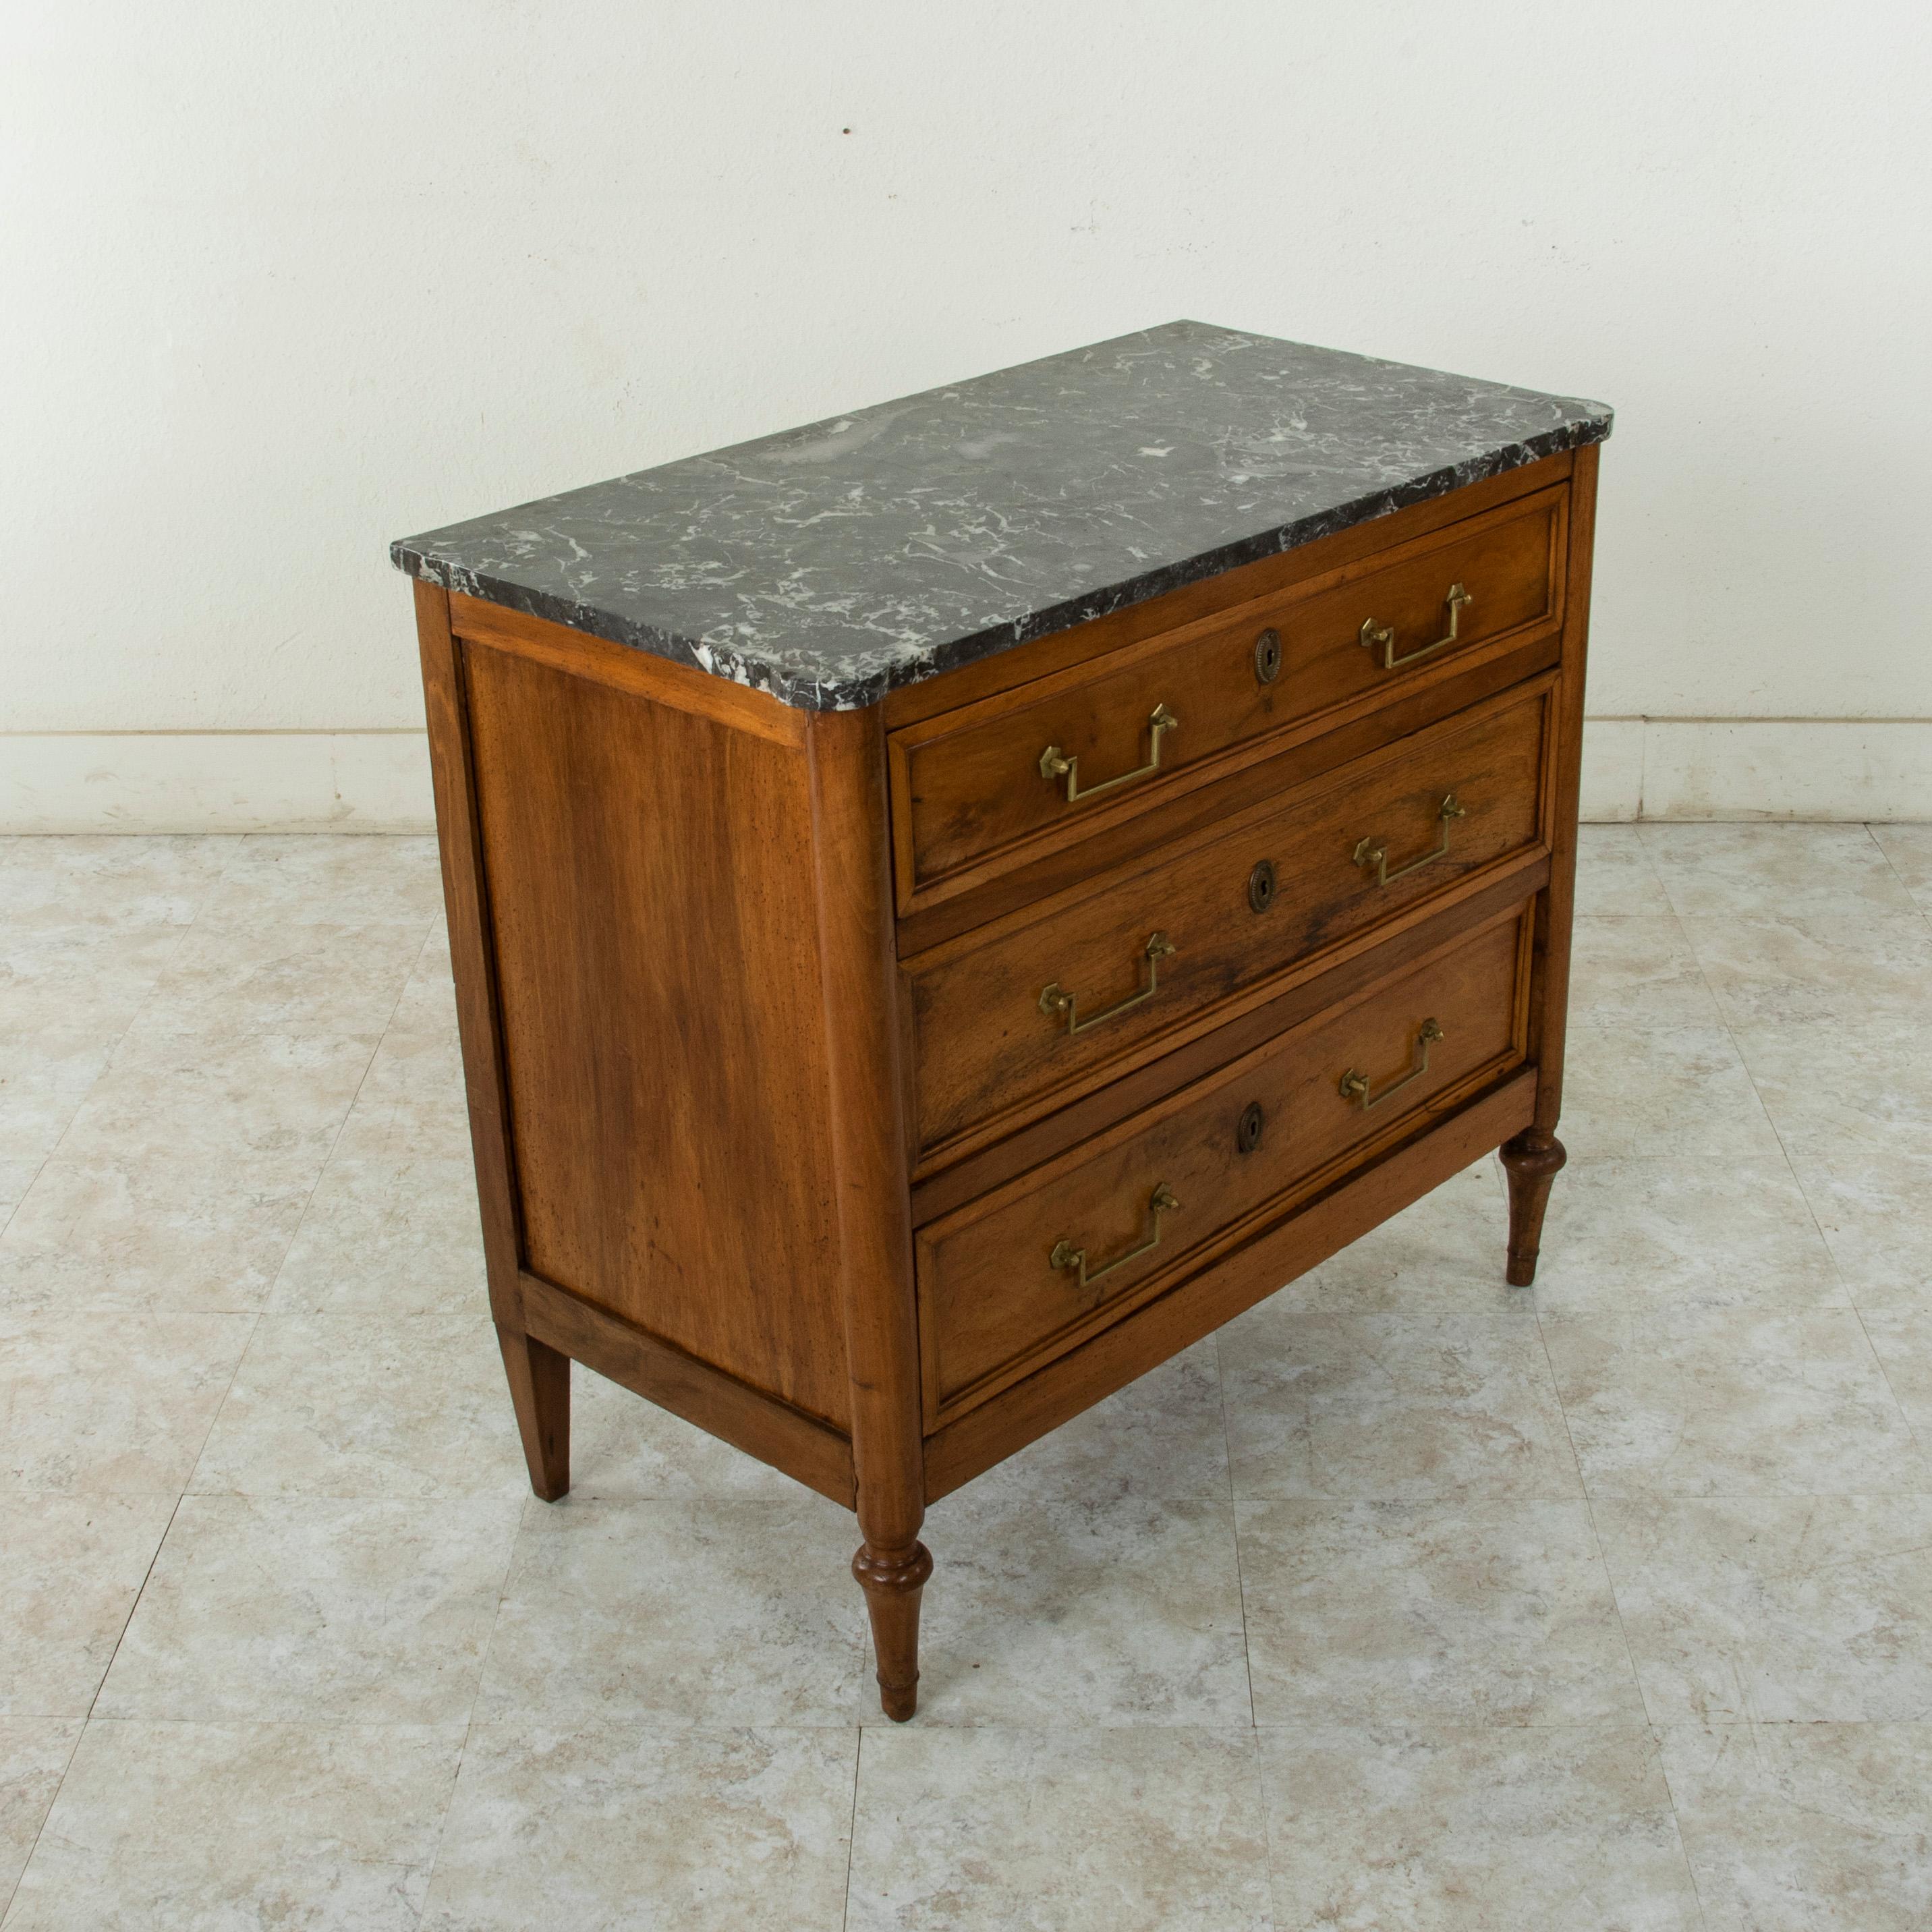 Unusual for its smaller size with a 37.25 inch width, this late 18th century French Louis XVI period commode or chest of drawers features its original Saint Anne marble top. Constructed of solid walnut, this piece has three drawers of dovetail